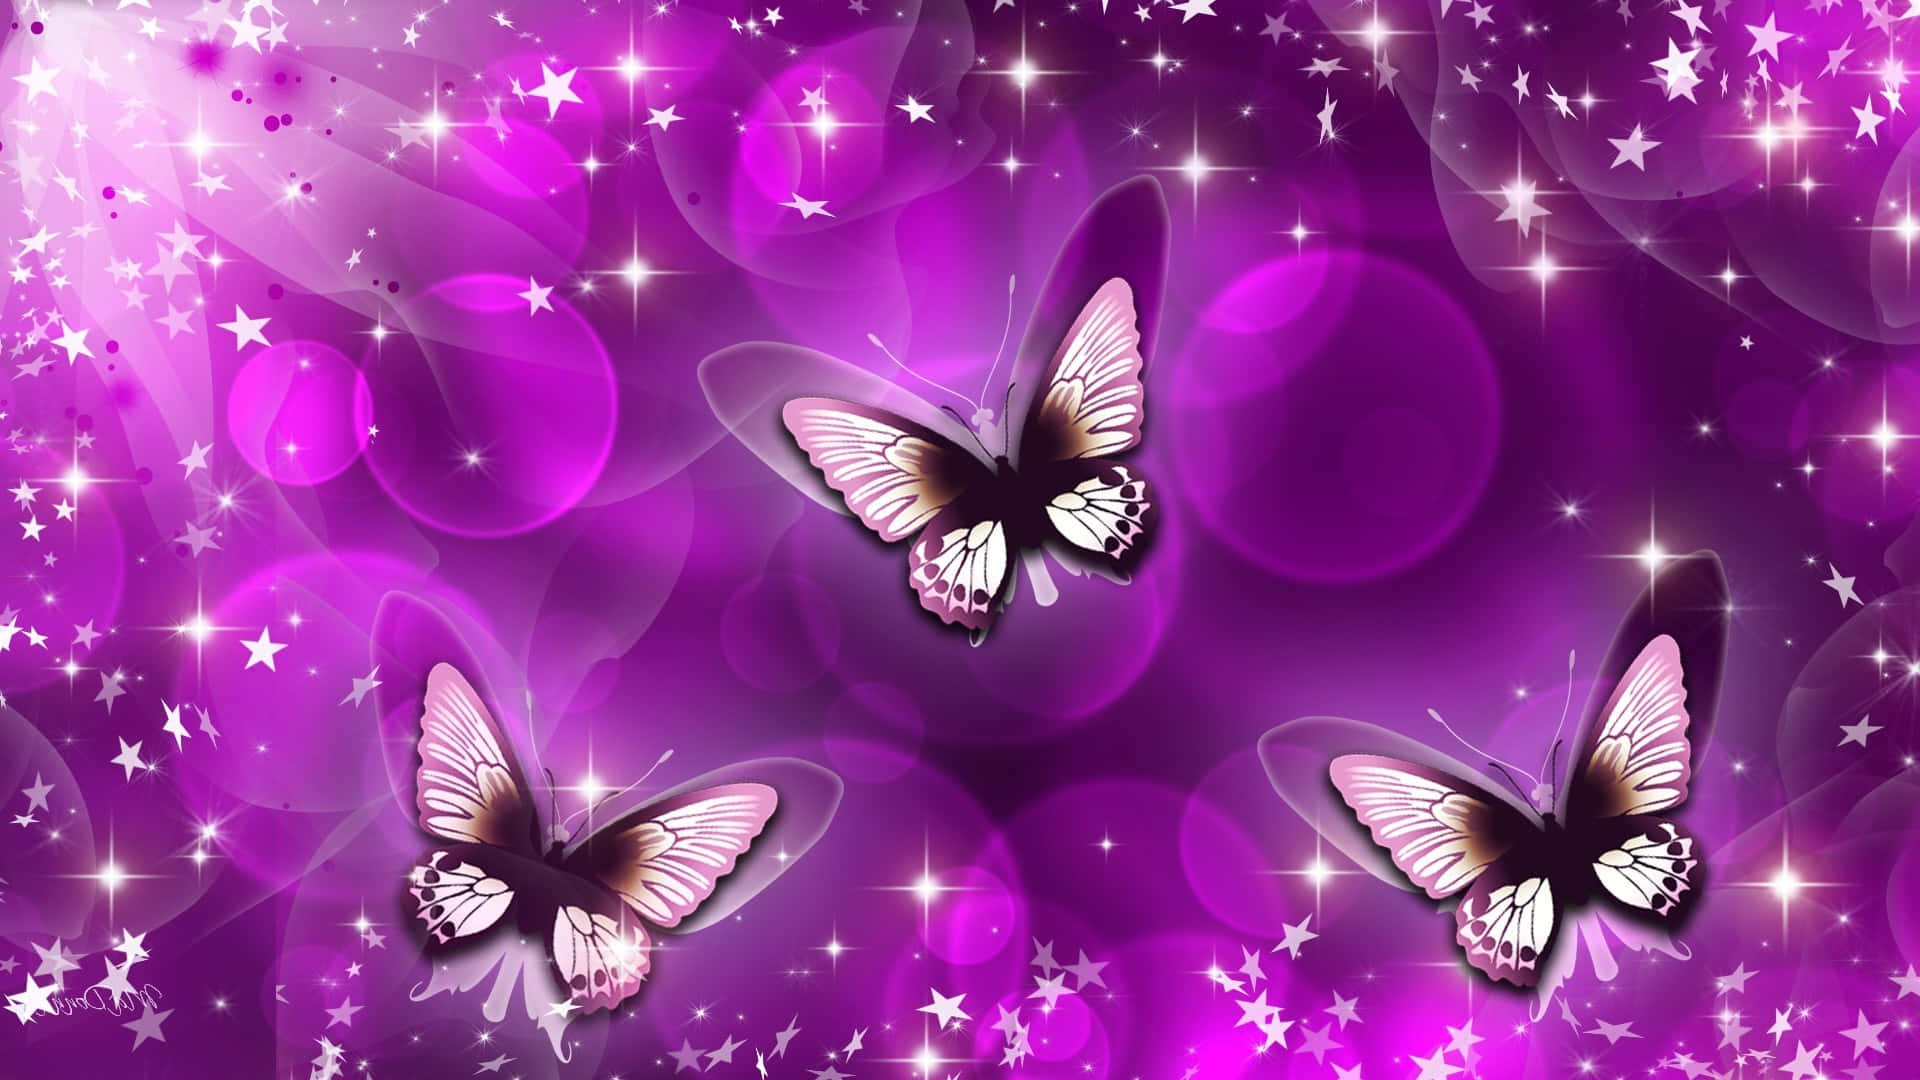 Find Inner Peace Amidst Nature - Butterfly Watching Wallpaper